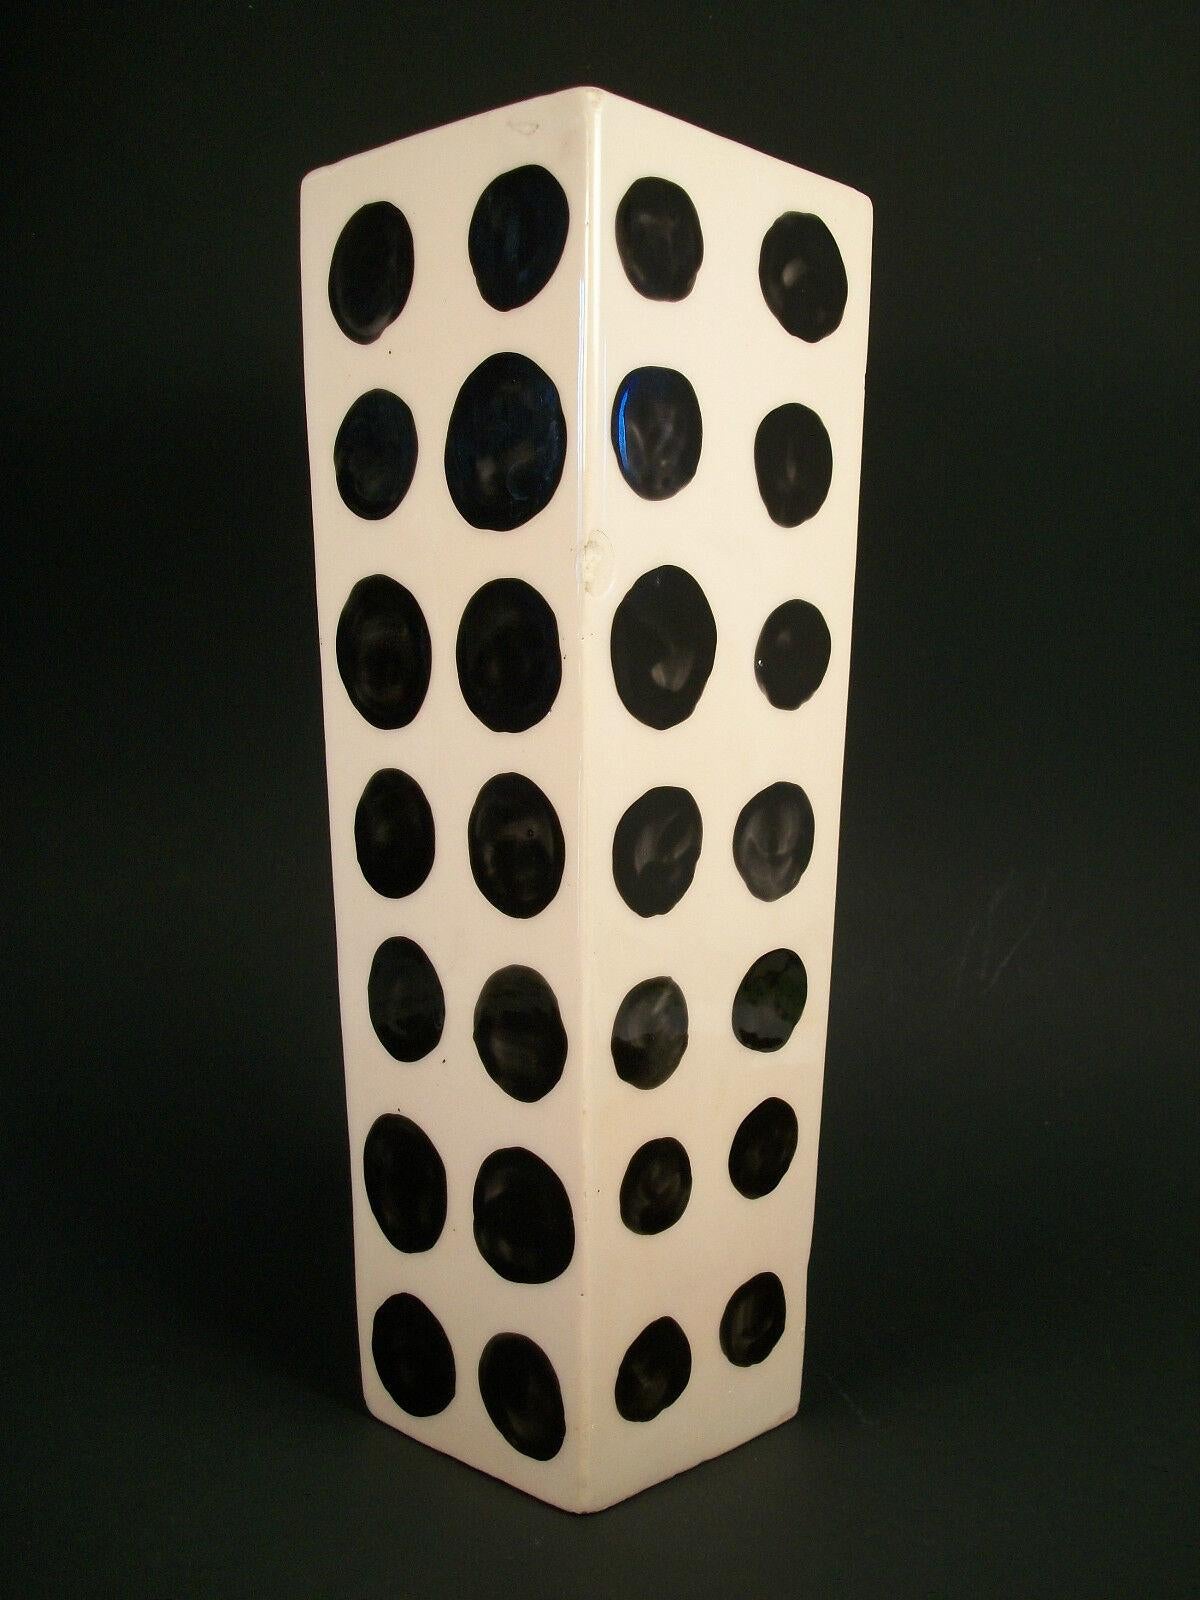 Mid Century Modern studio pottery hand painted vase - slab formed - over-all cream colored glaze and hand painted black dots to all four sides - unsigned - circa 1970's.

Fair vintage condition - glaze chips (two photographed) - no cracks - minor